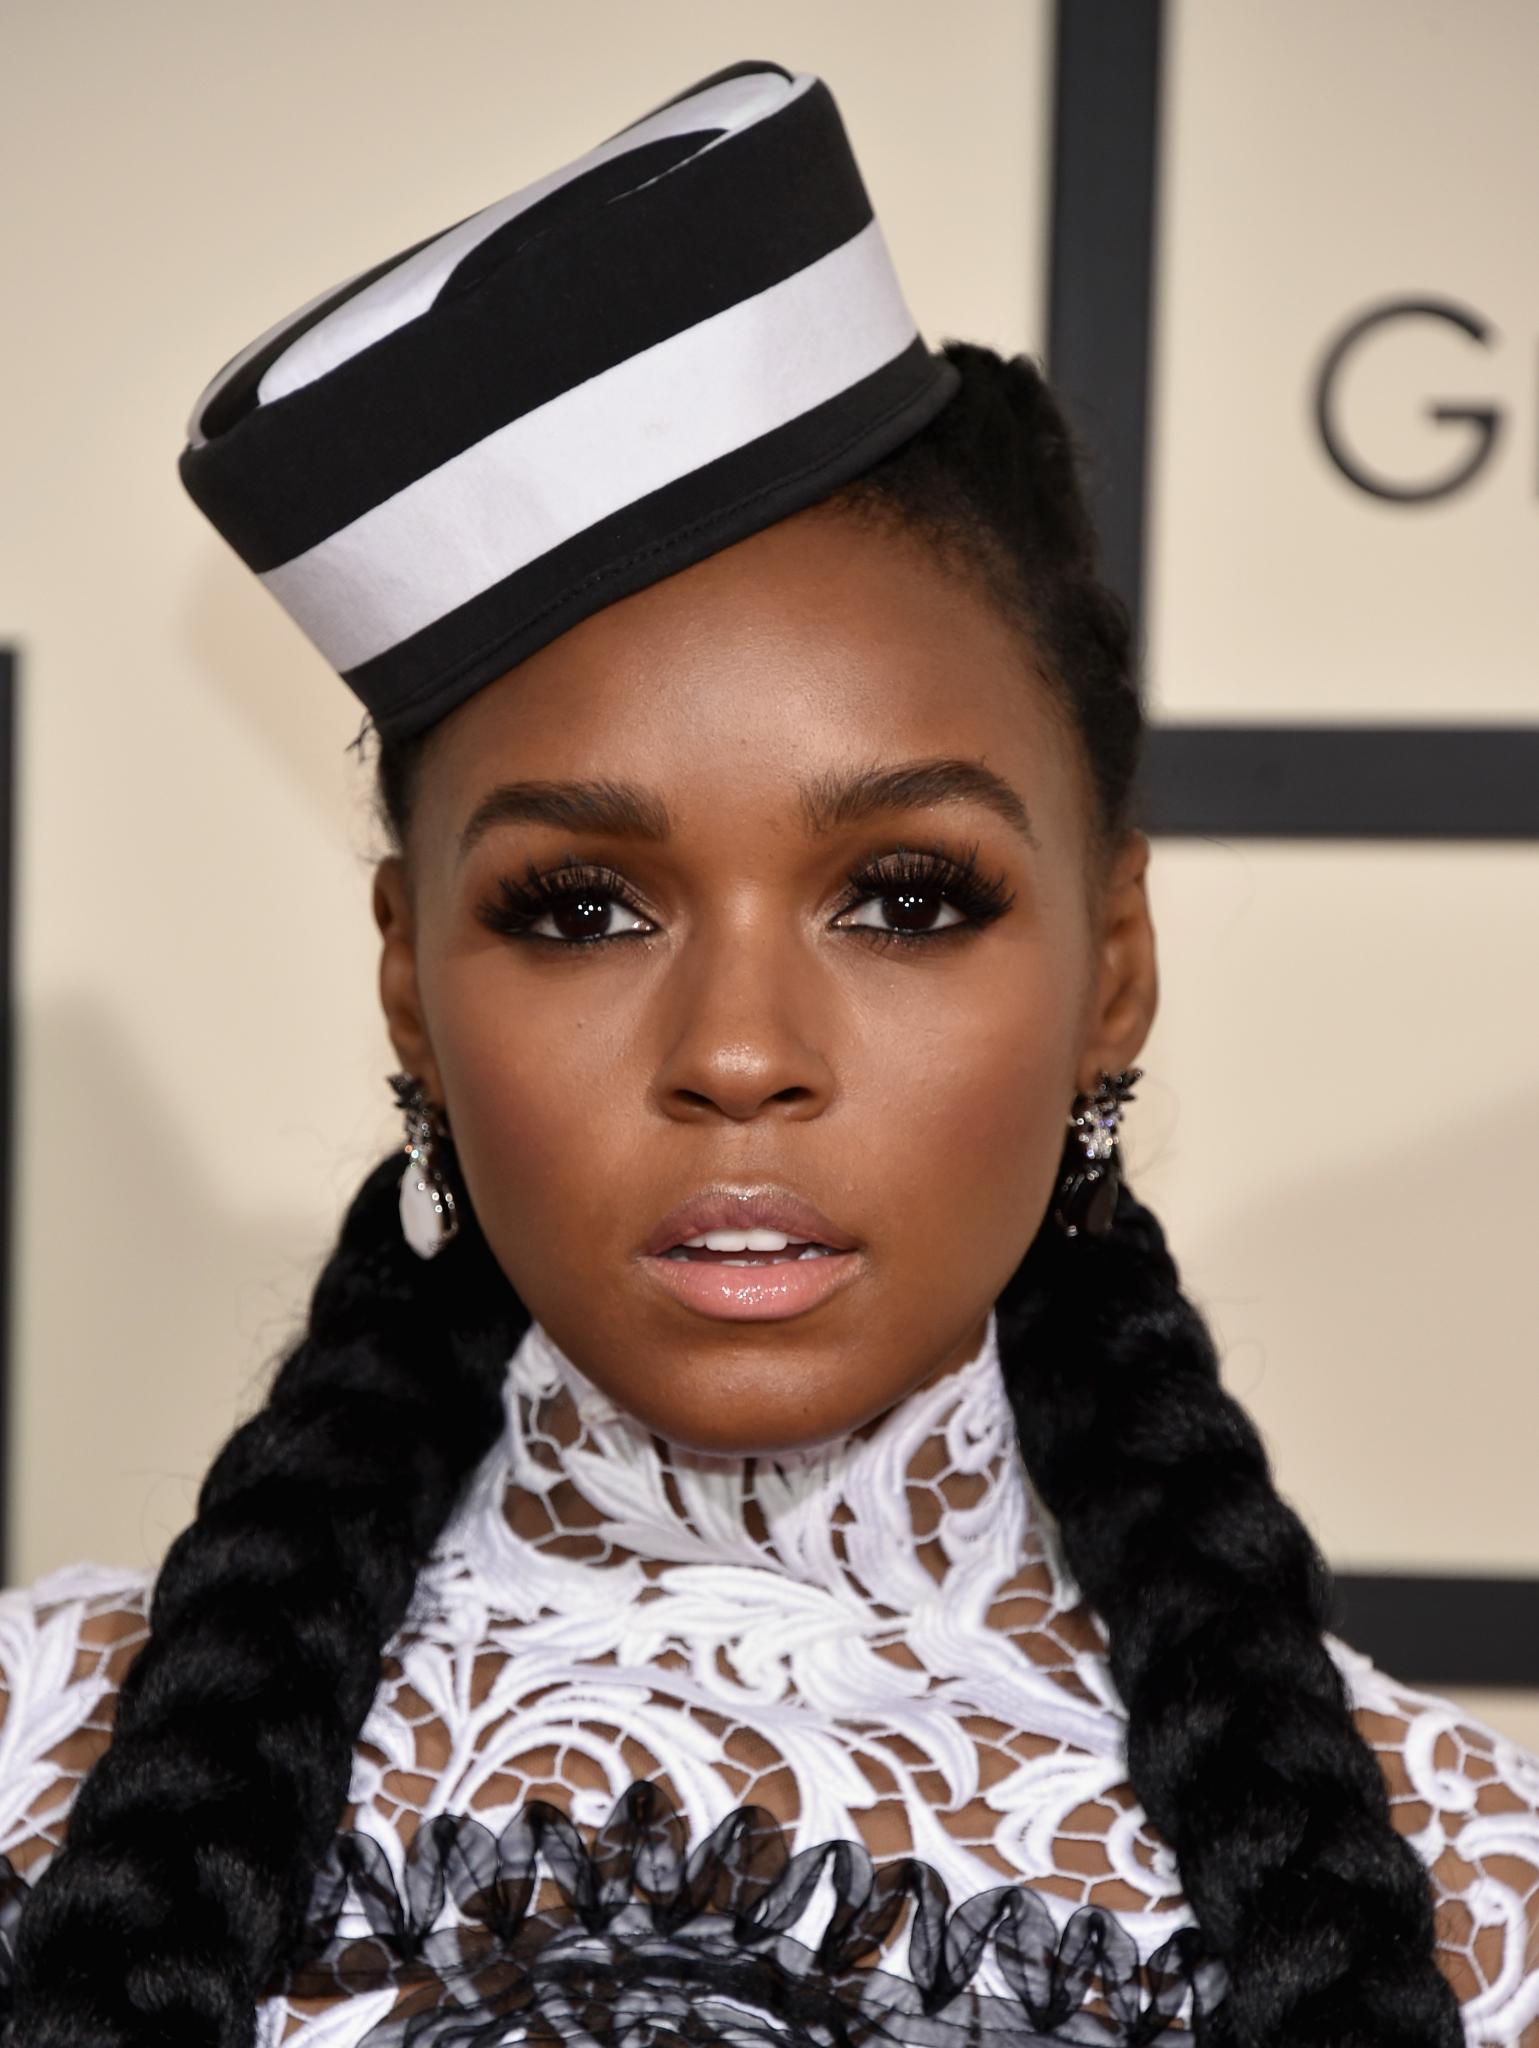 15 Must-See Hairstyles From the 2016 Grammy Awards